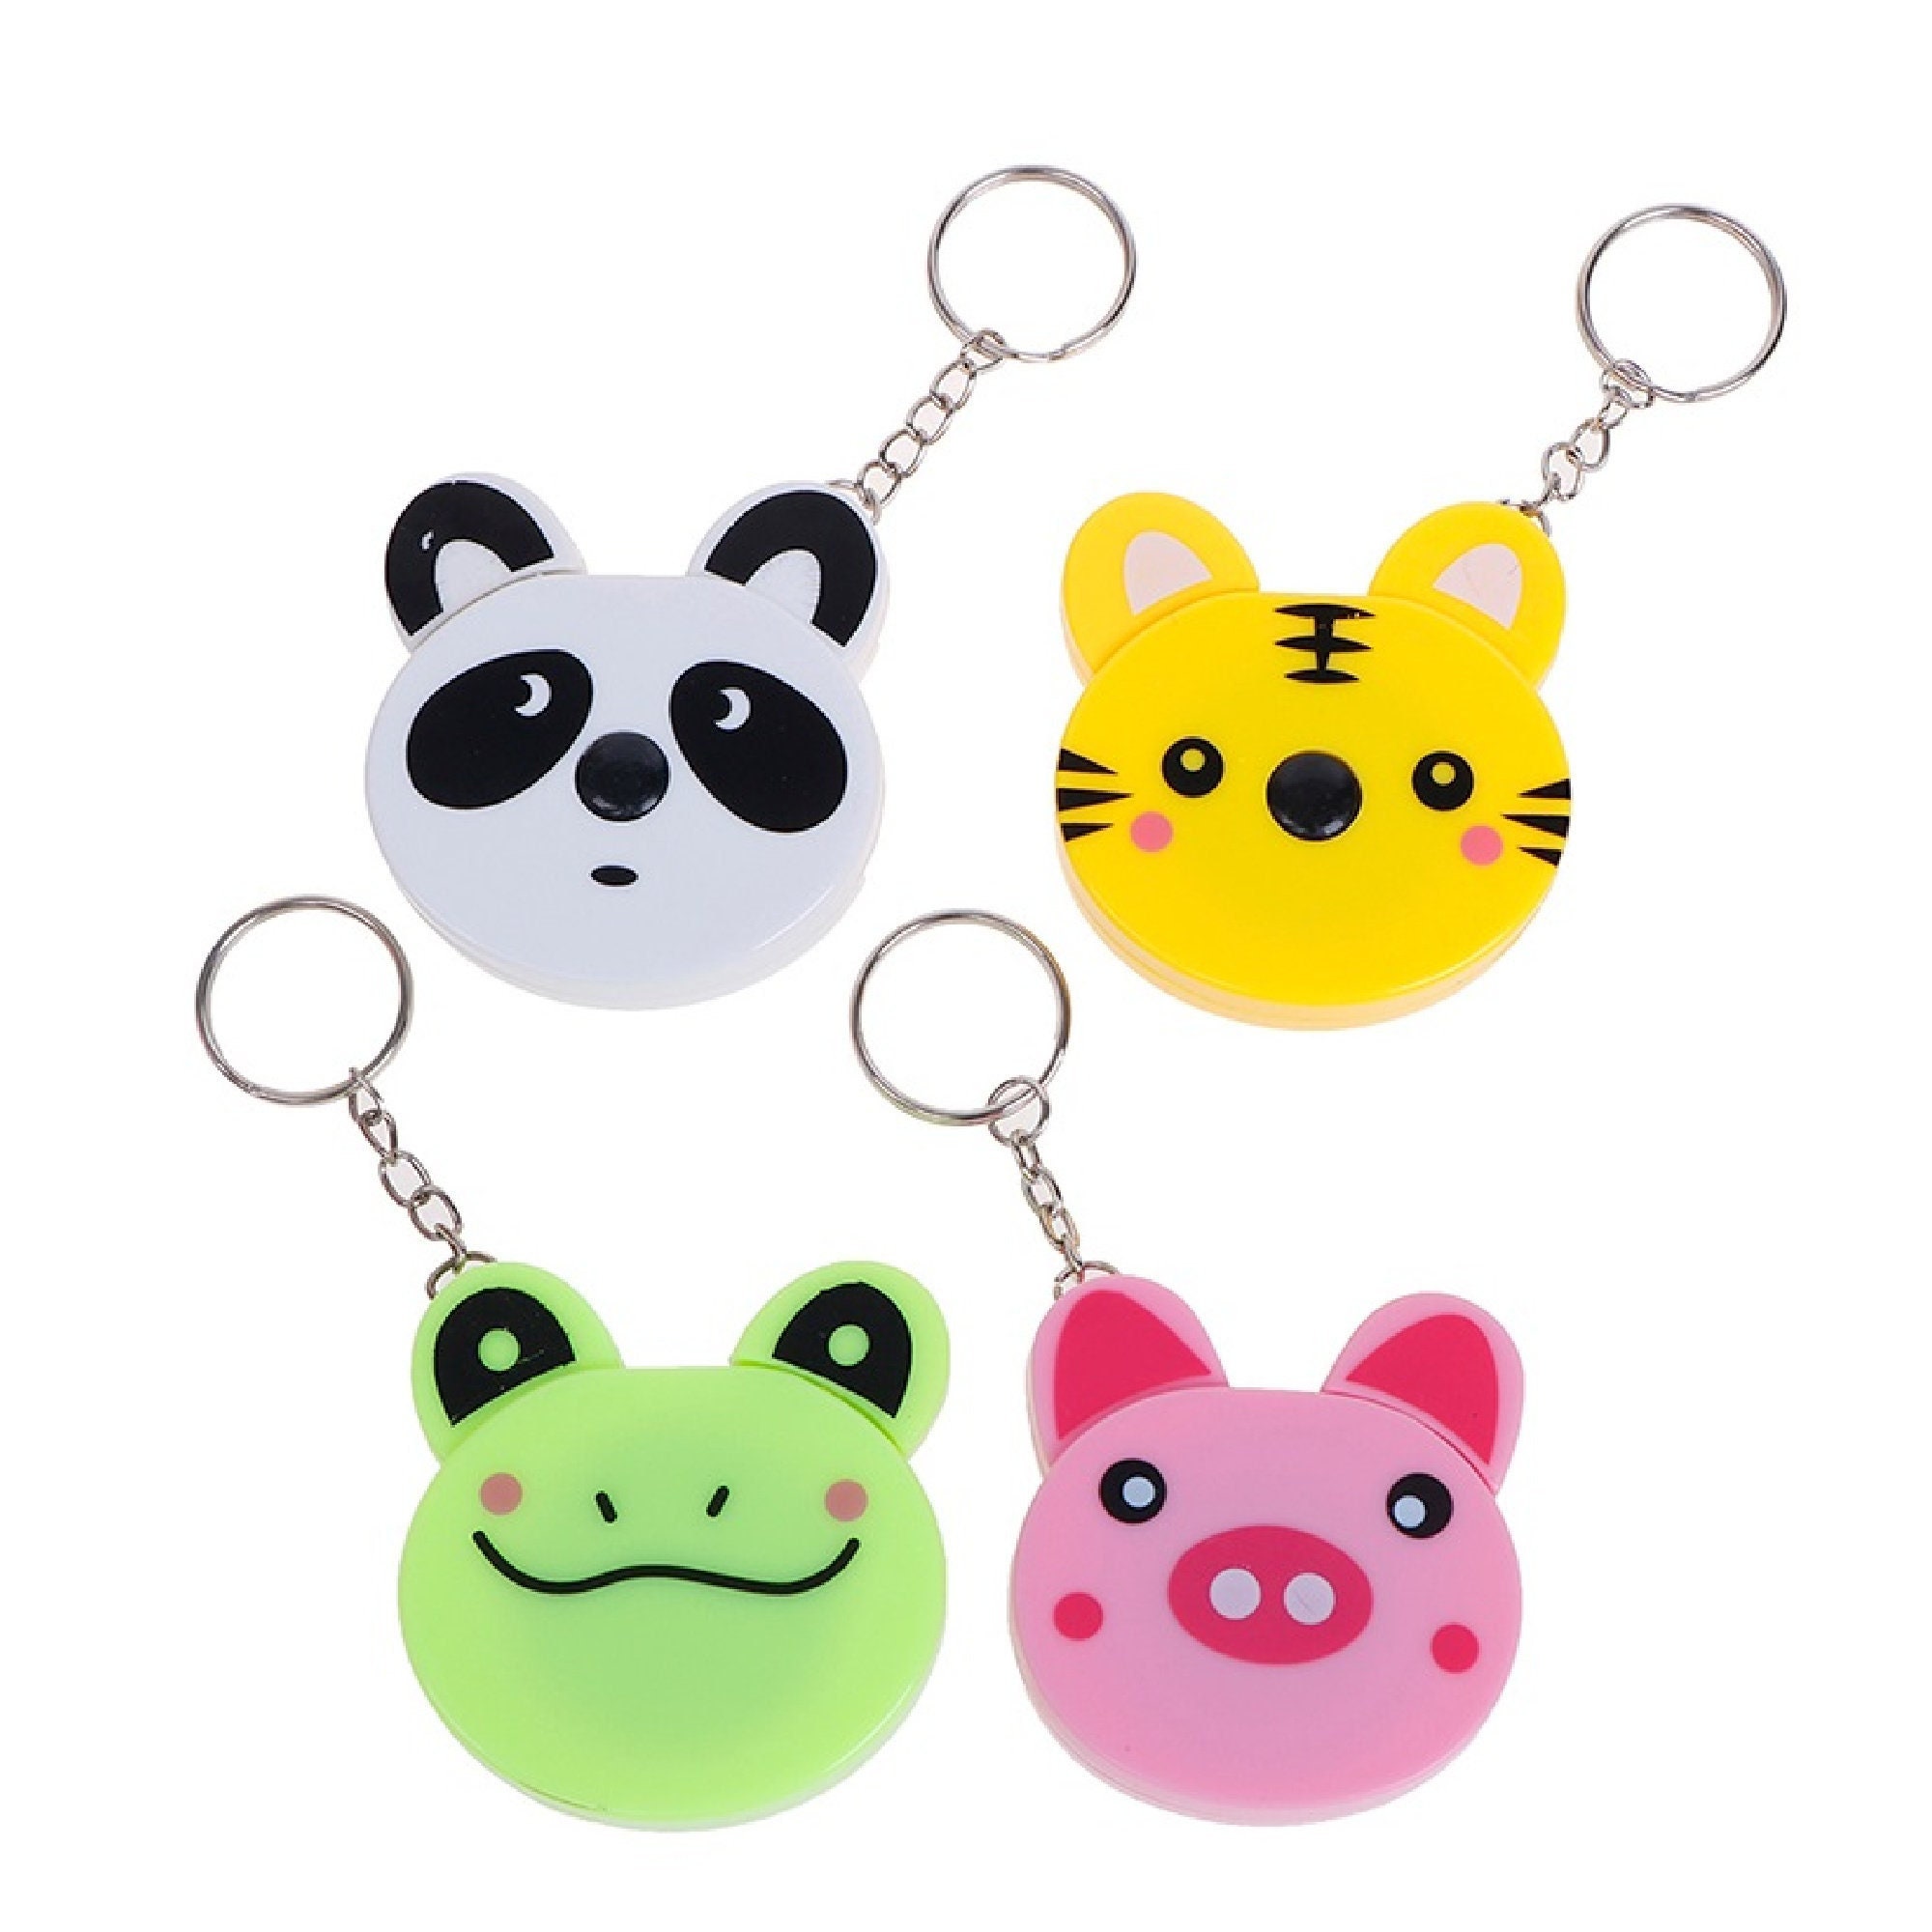 75 Personalized Key Chain / Measuring Tape Favors - Set of 75